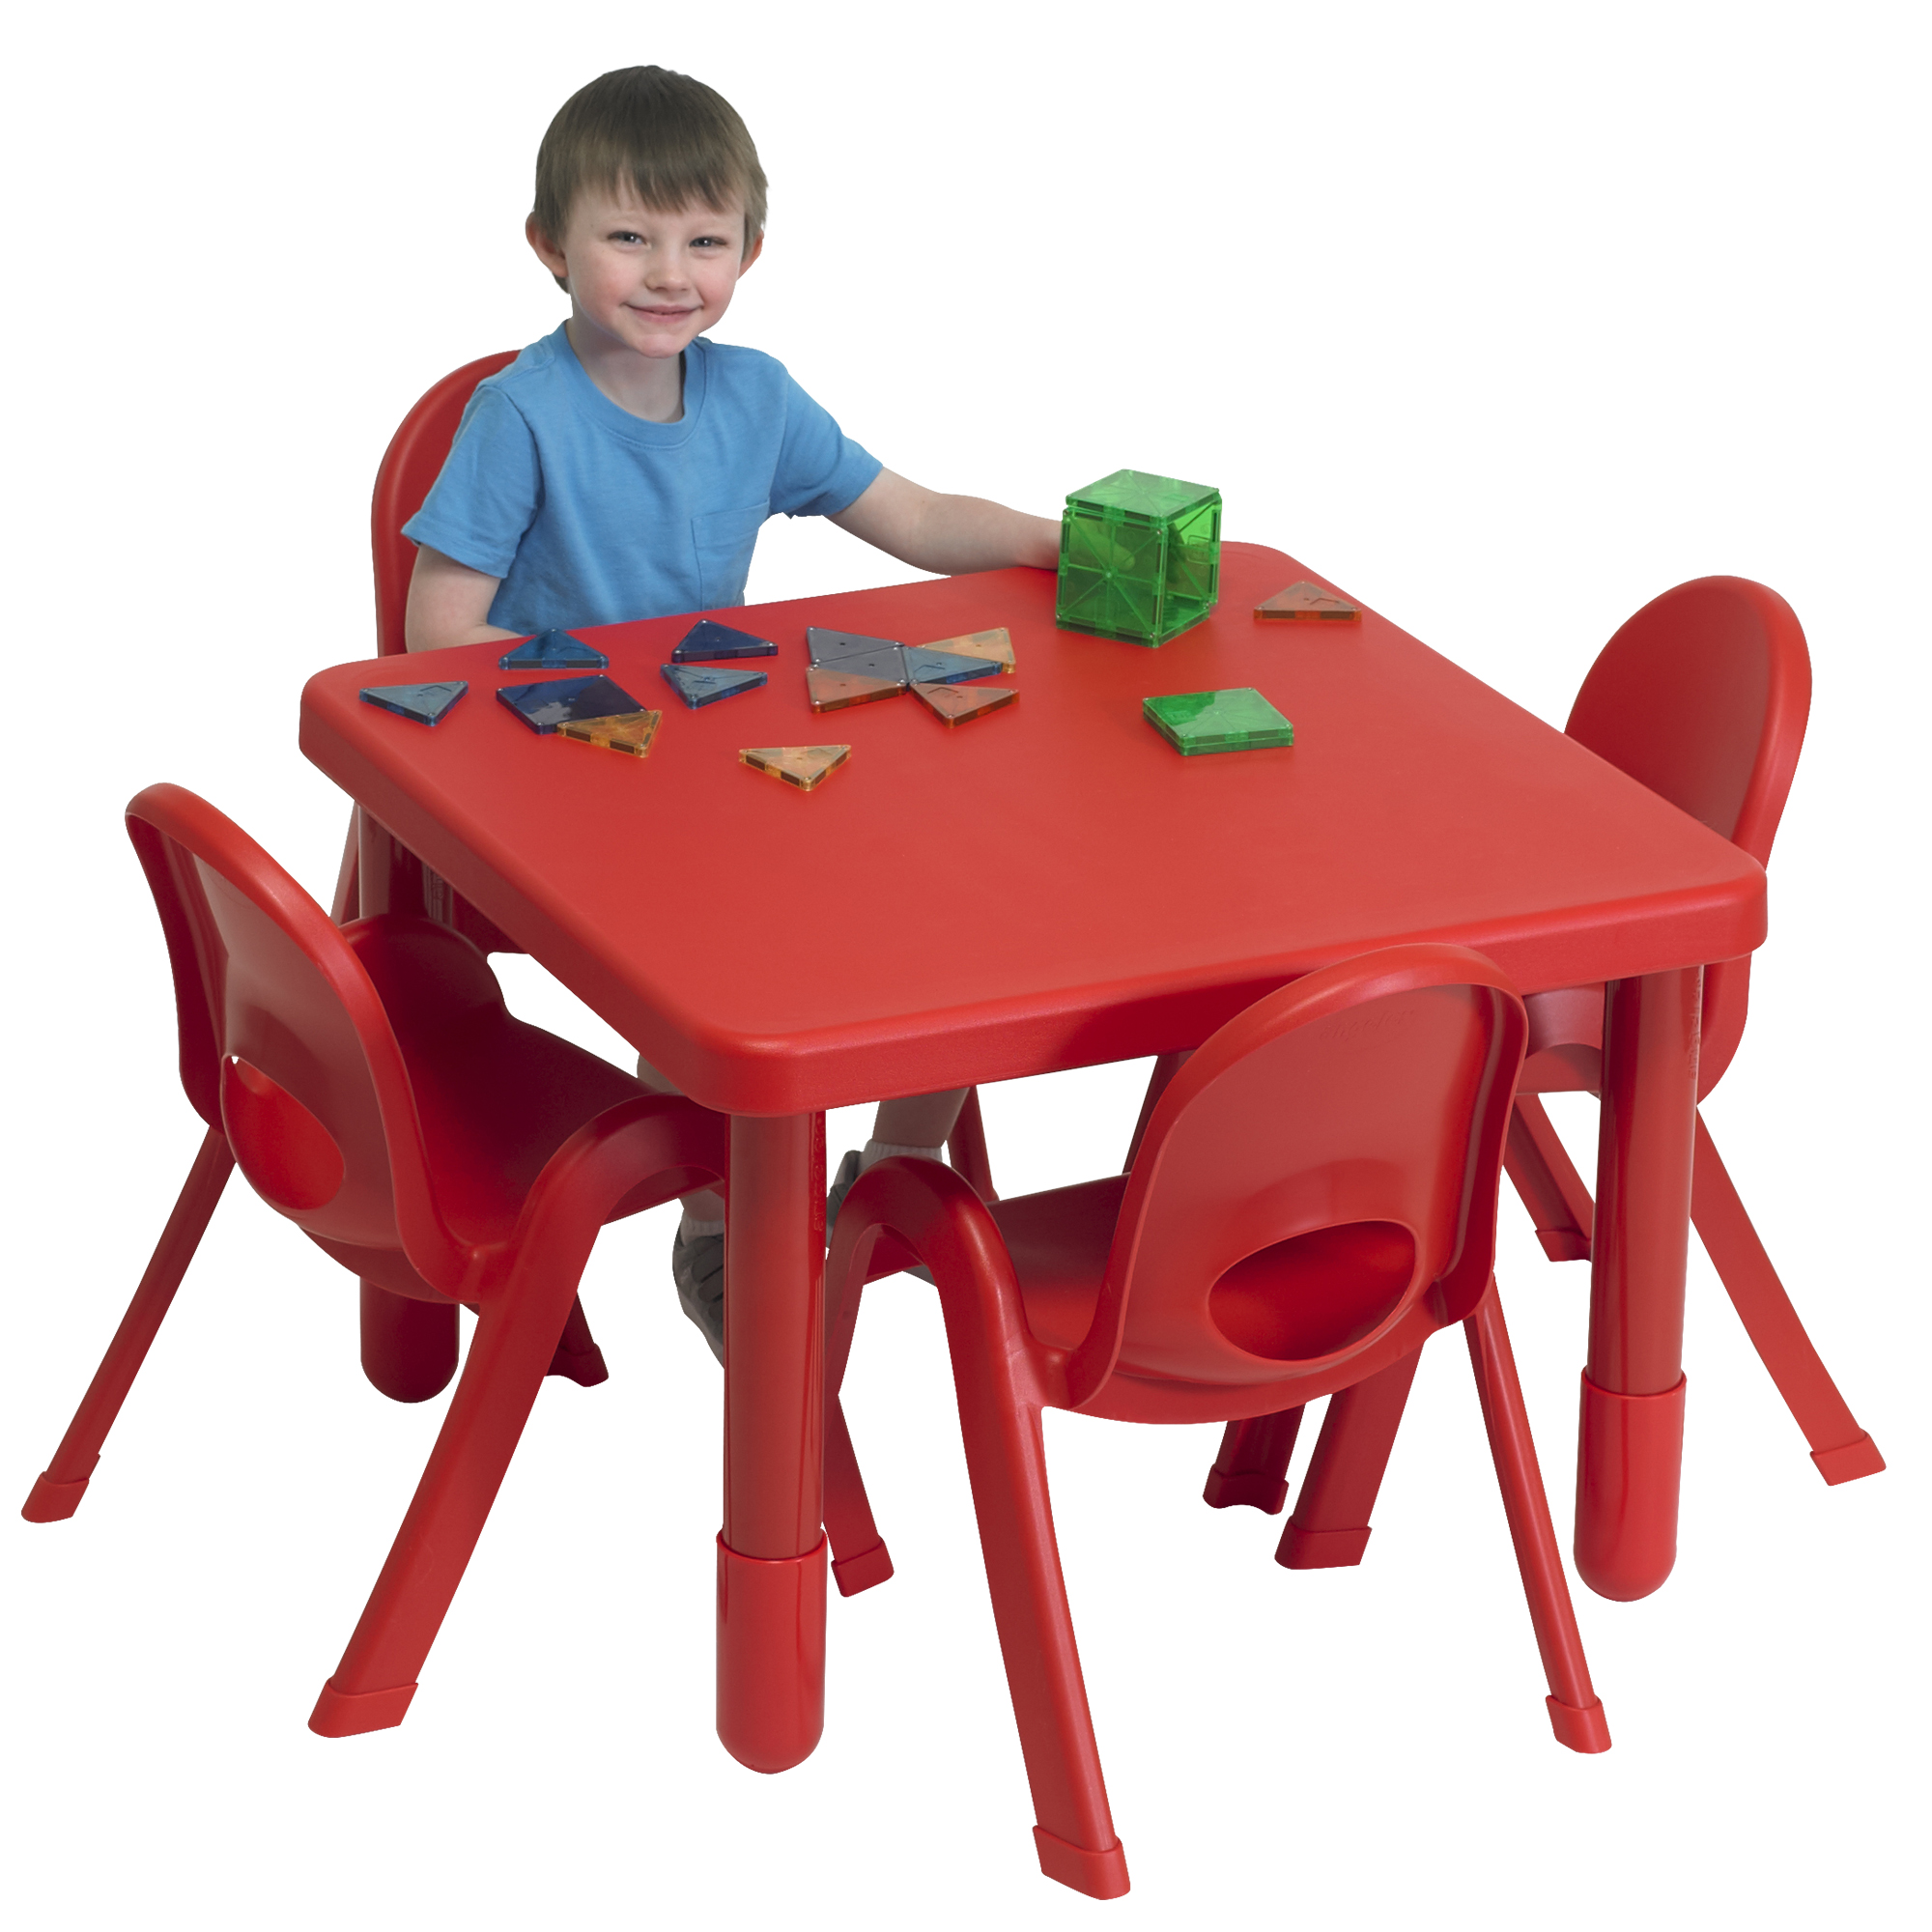 Preschool MyValue™ Set 4 Square - Candy Apple Red